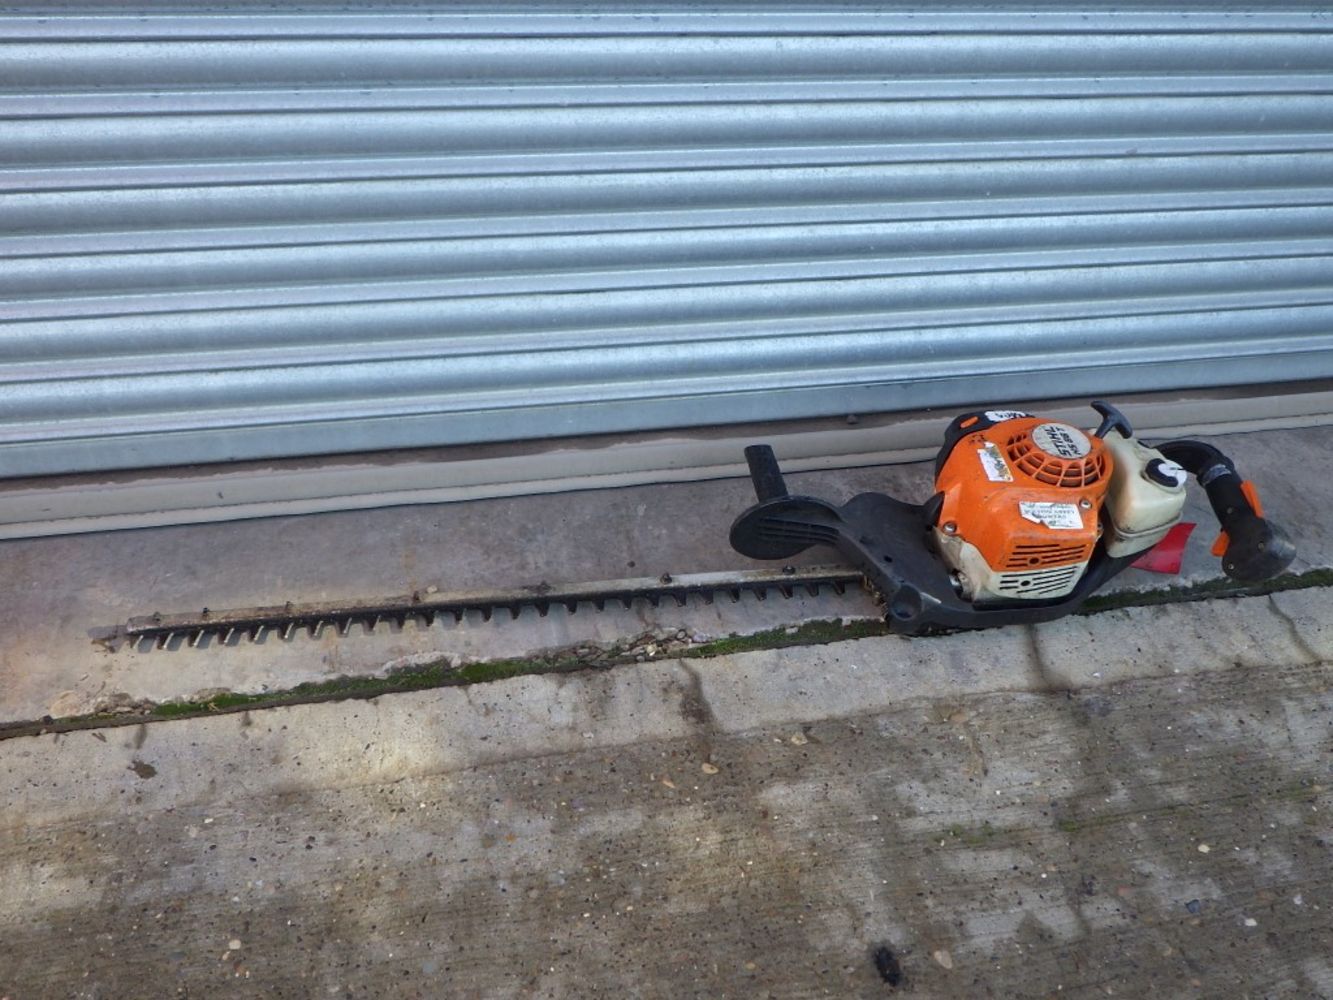 Timed Auction of Grounds Care Equipment, Small Plant, Spare Parts & Other Sundry Items